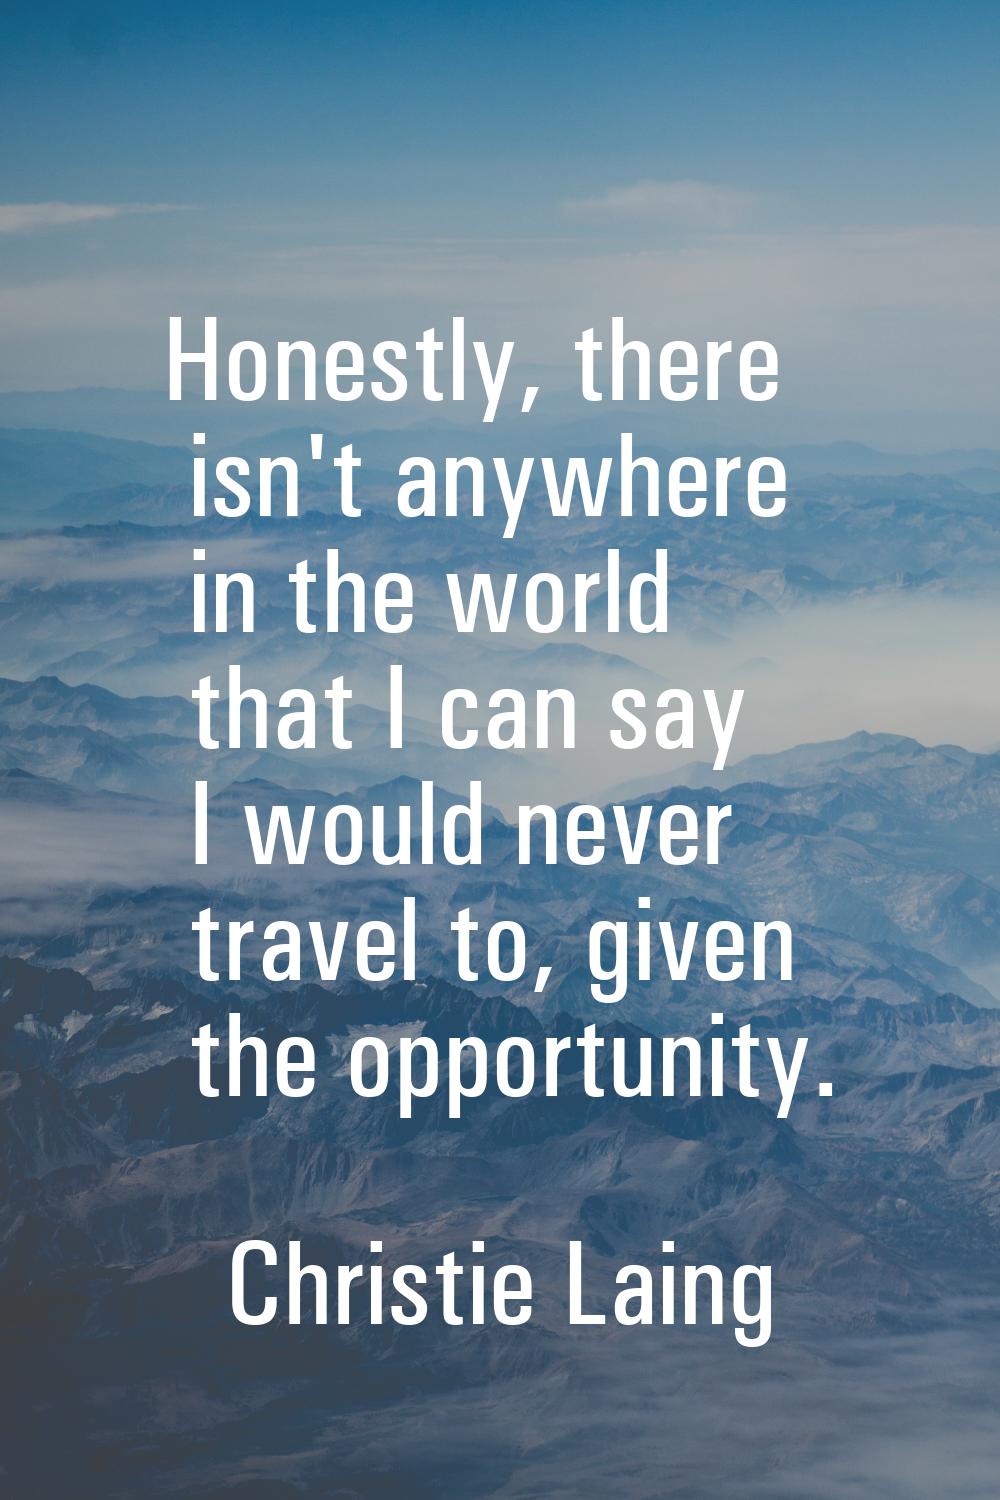 Honestly, there isn't anywhere in the world that I can say I would never travel to, given the oppor